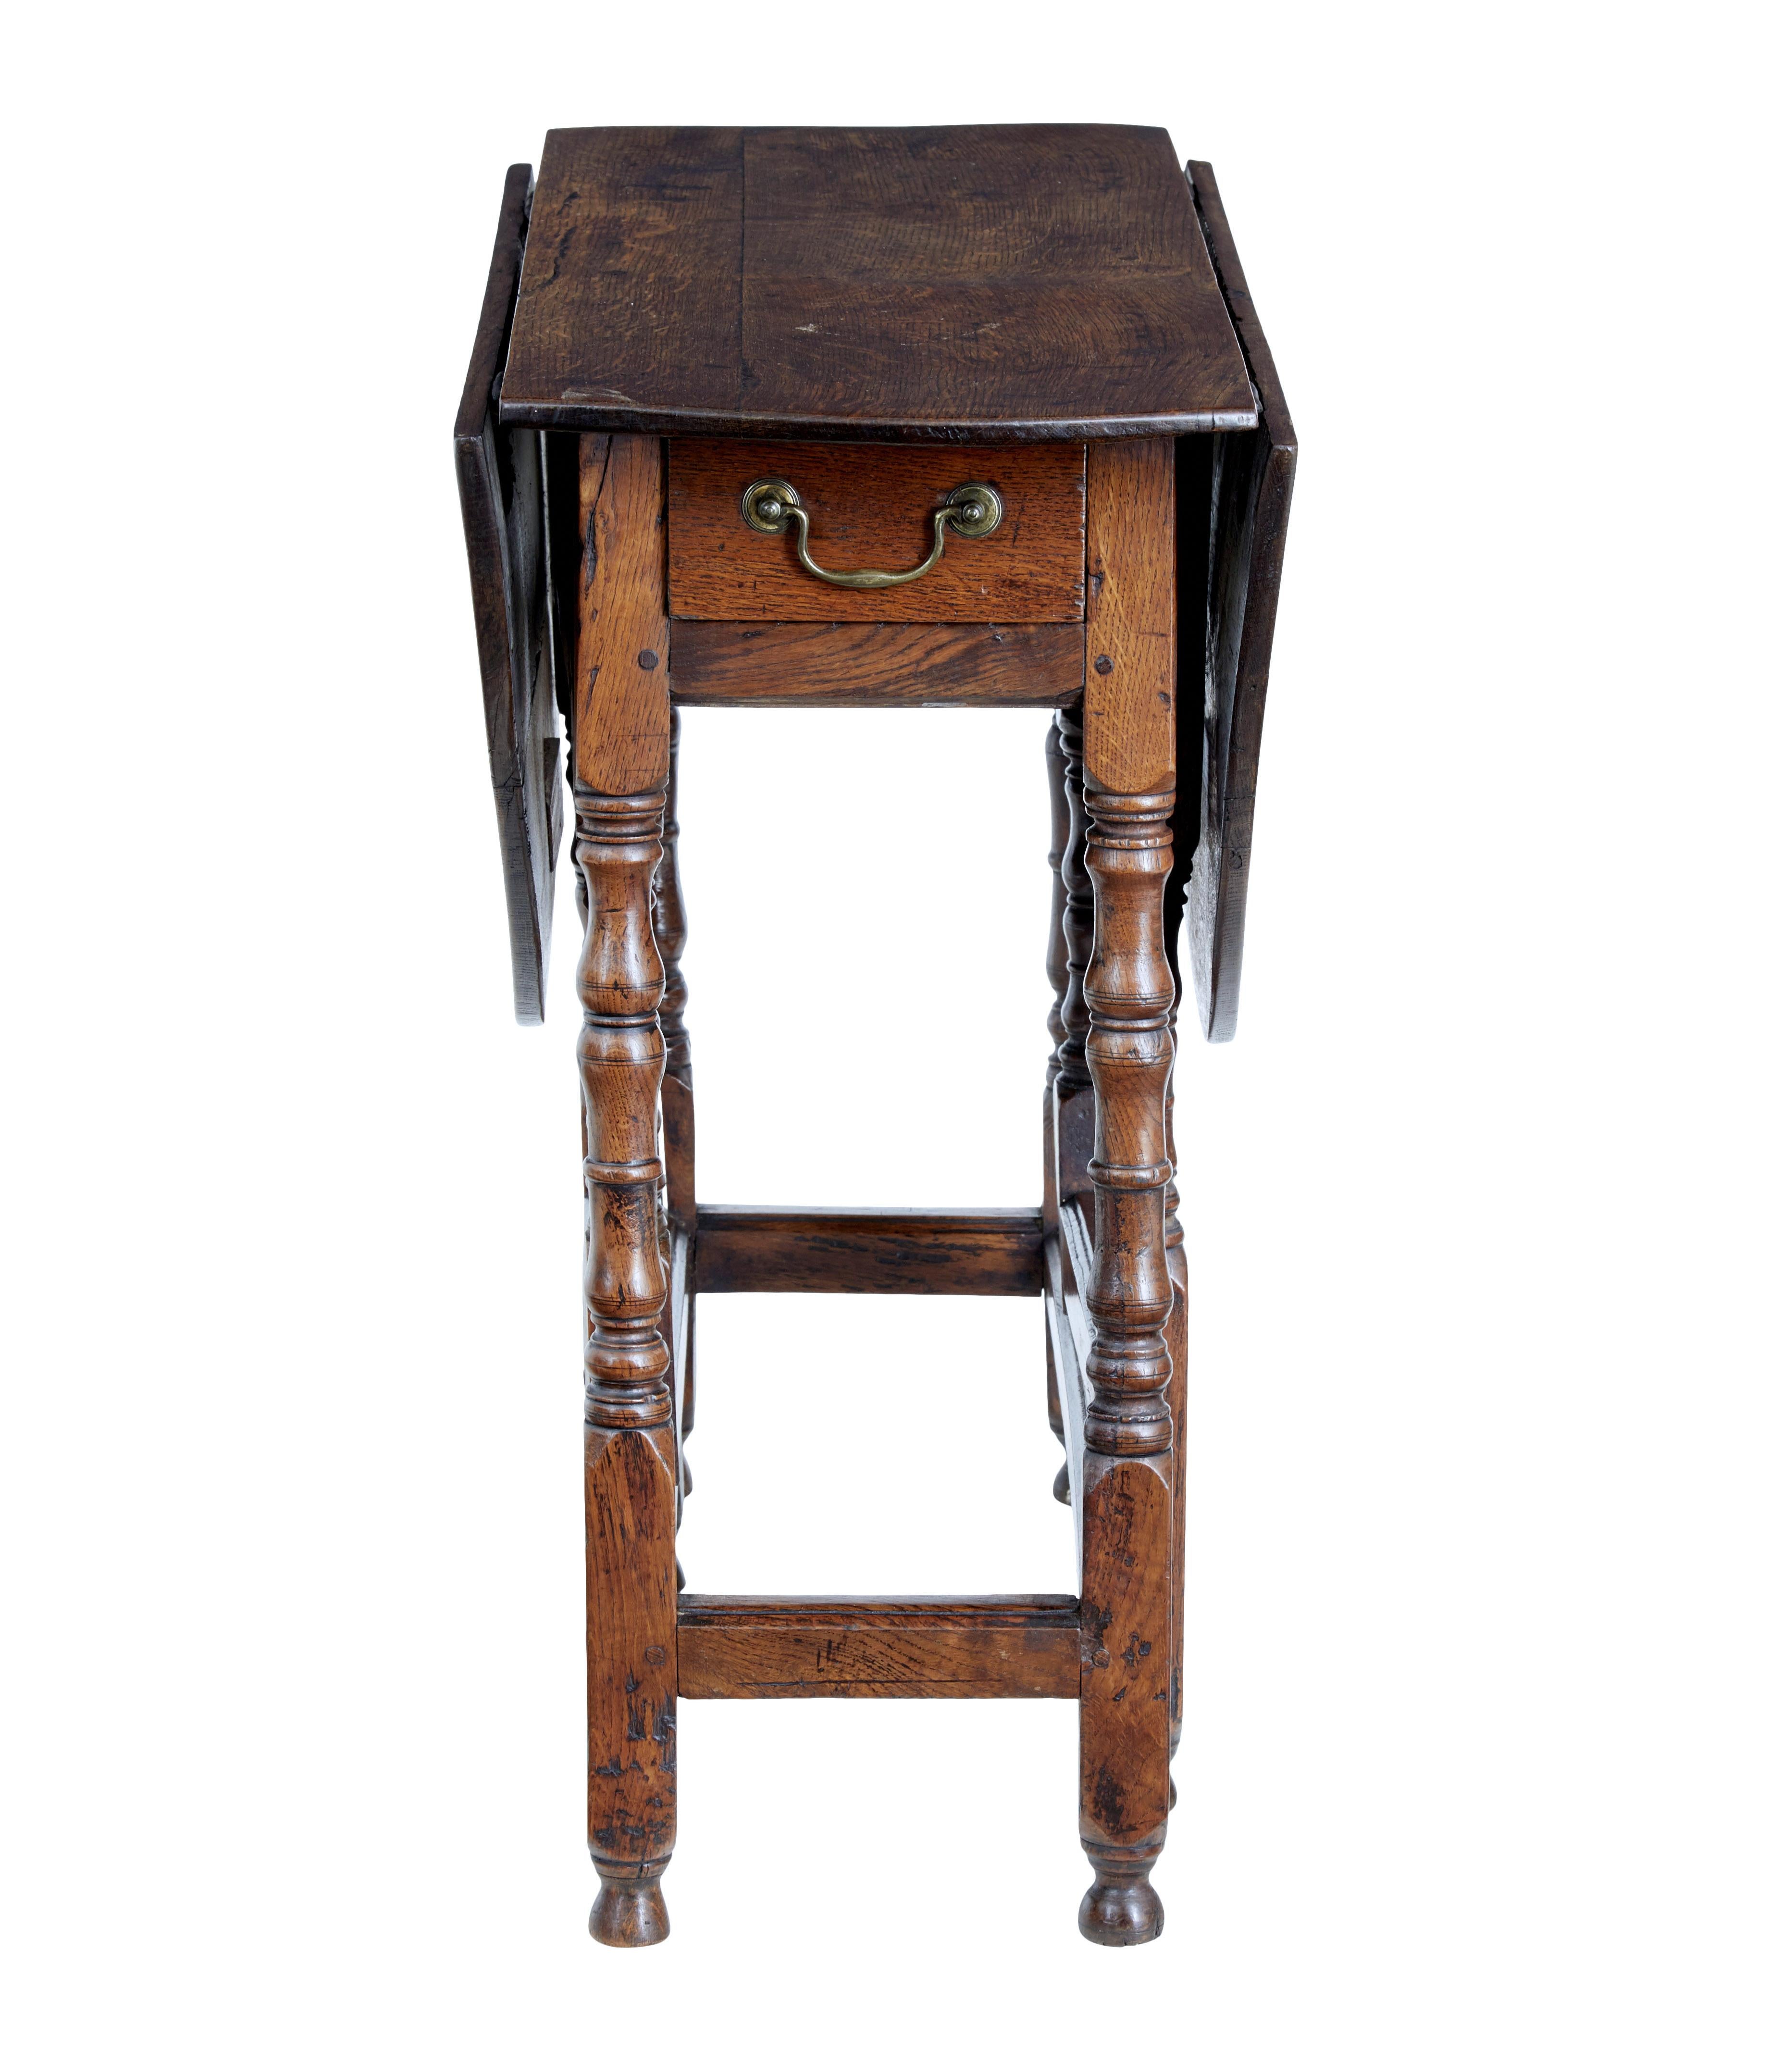 Small 18th century Georgian oak gate leg table circa 1780.

Delightful piece of English furniture which is not too far away from it's 250th birthday.

Made in oak, drop leaves on hinges lift up with the leg supports to form a surface of 34 1/2